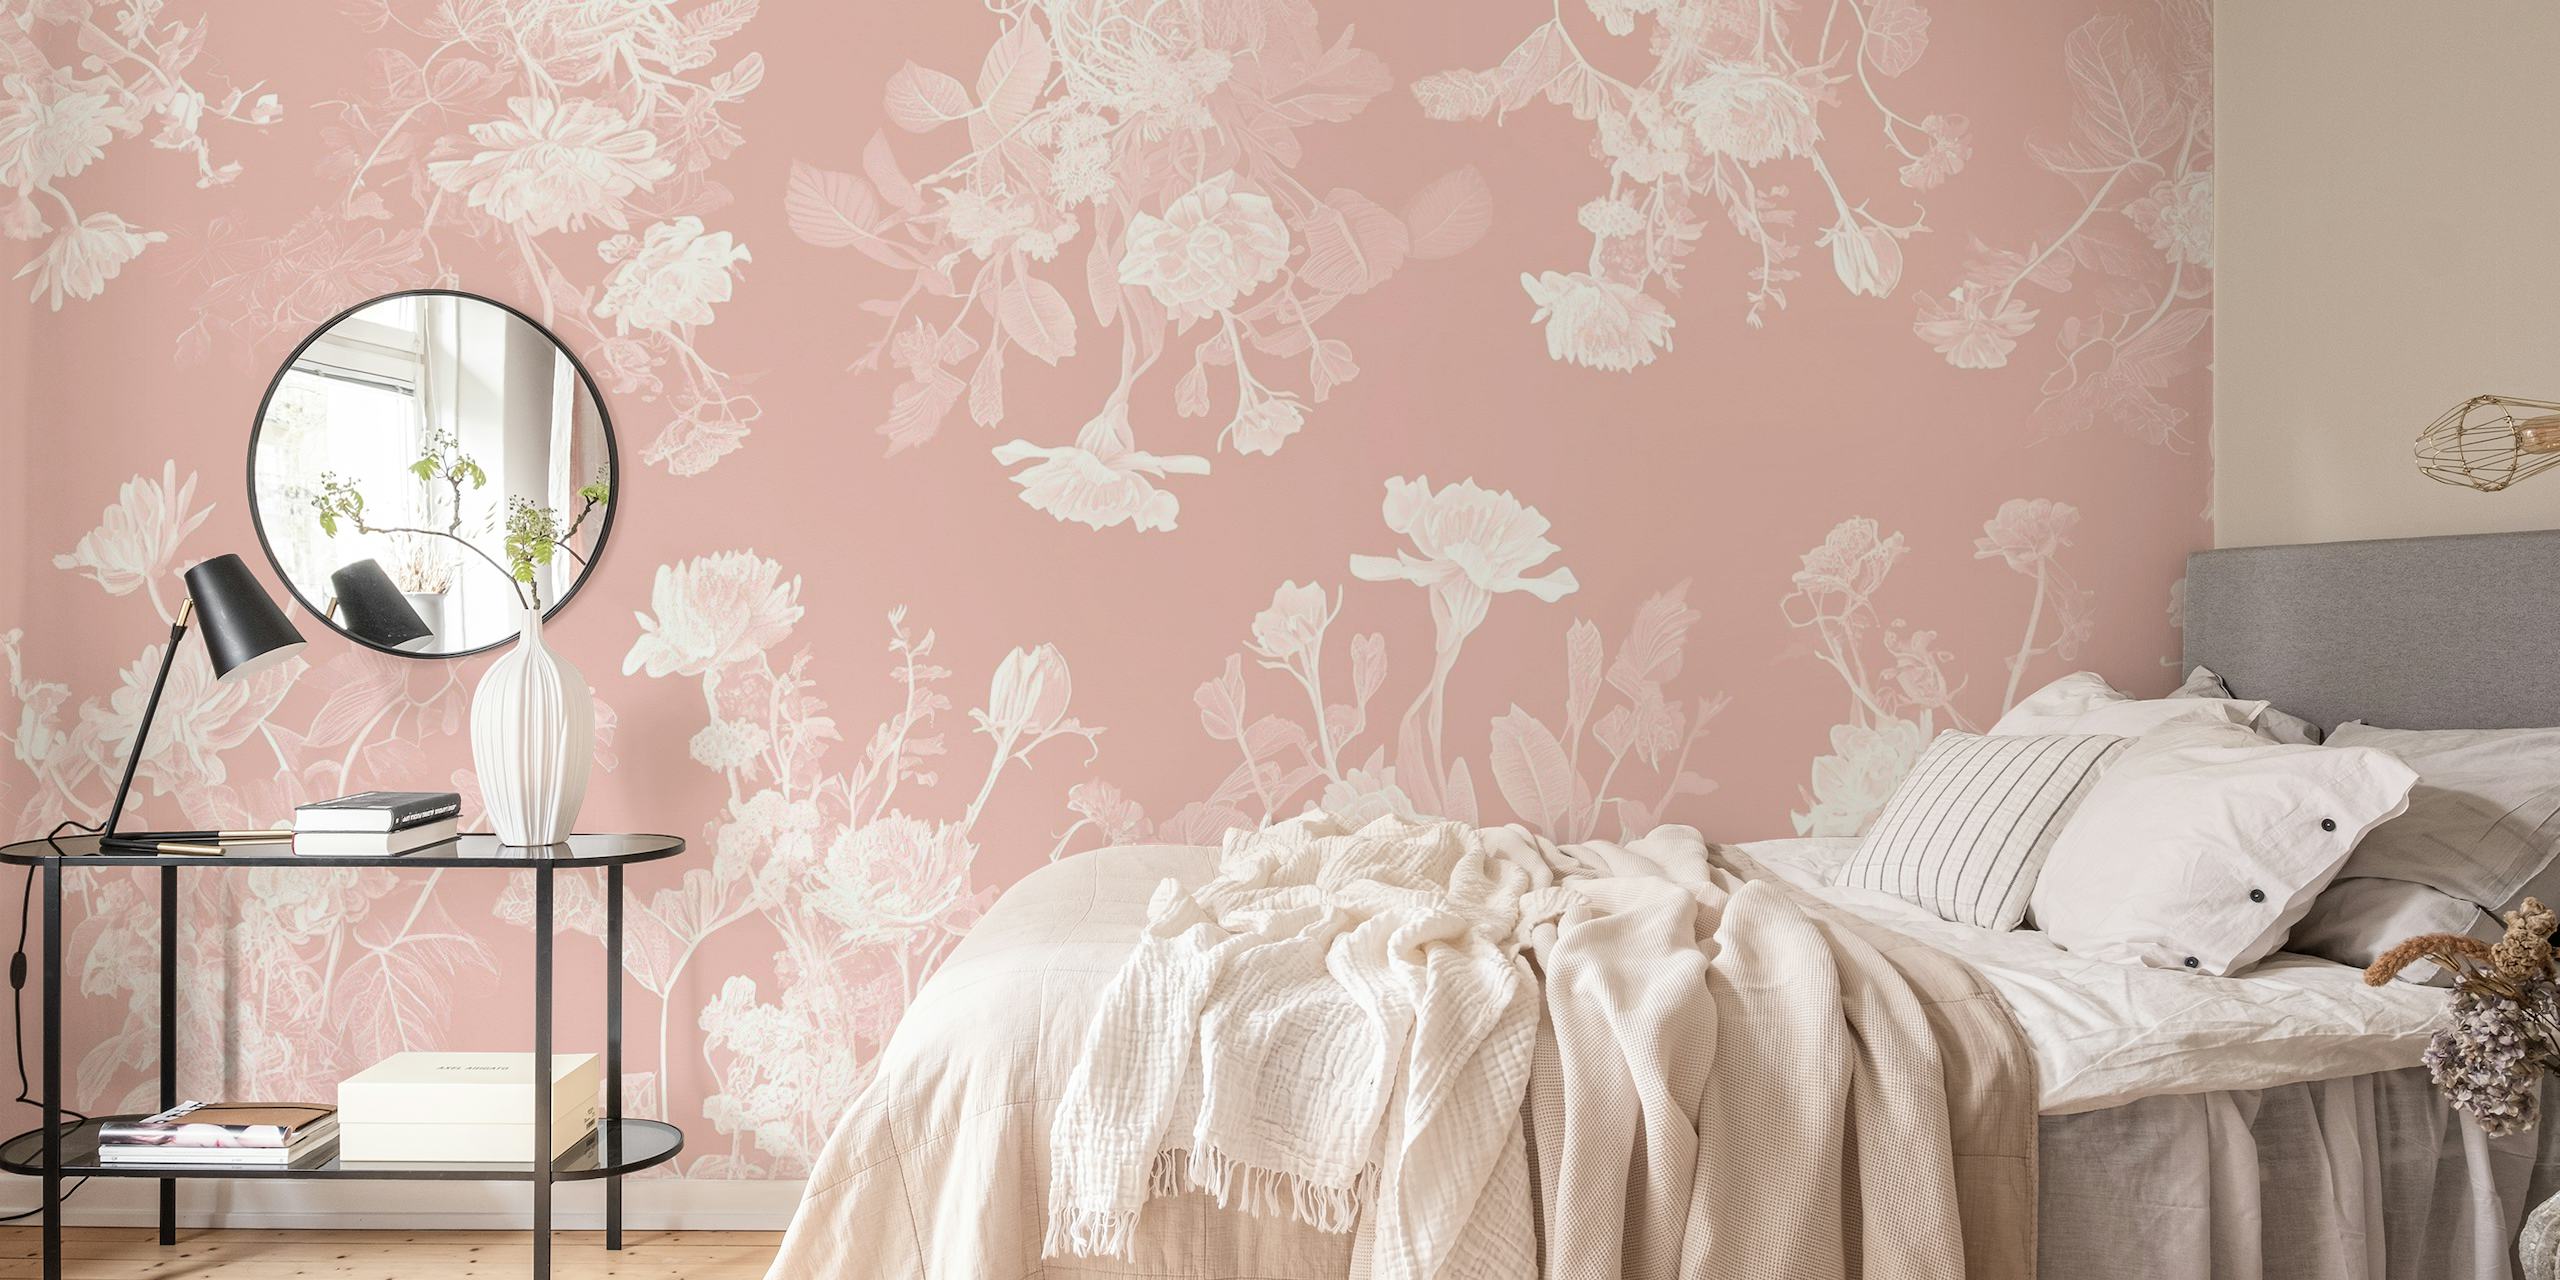 Soft pink floral wall mural with subtle botanical patterns